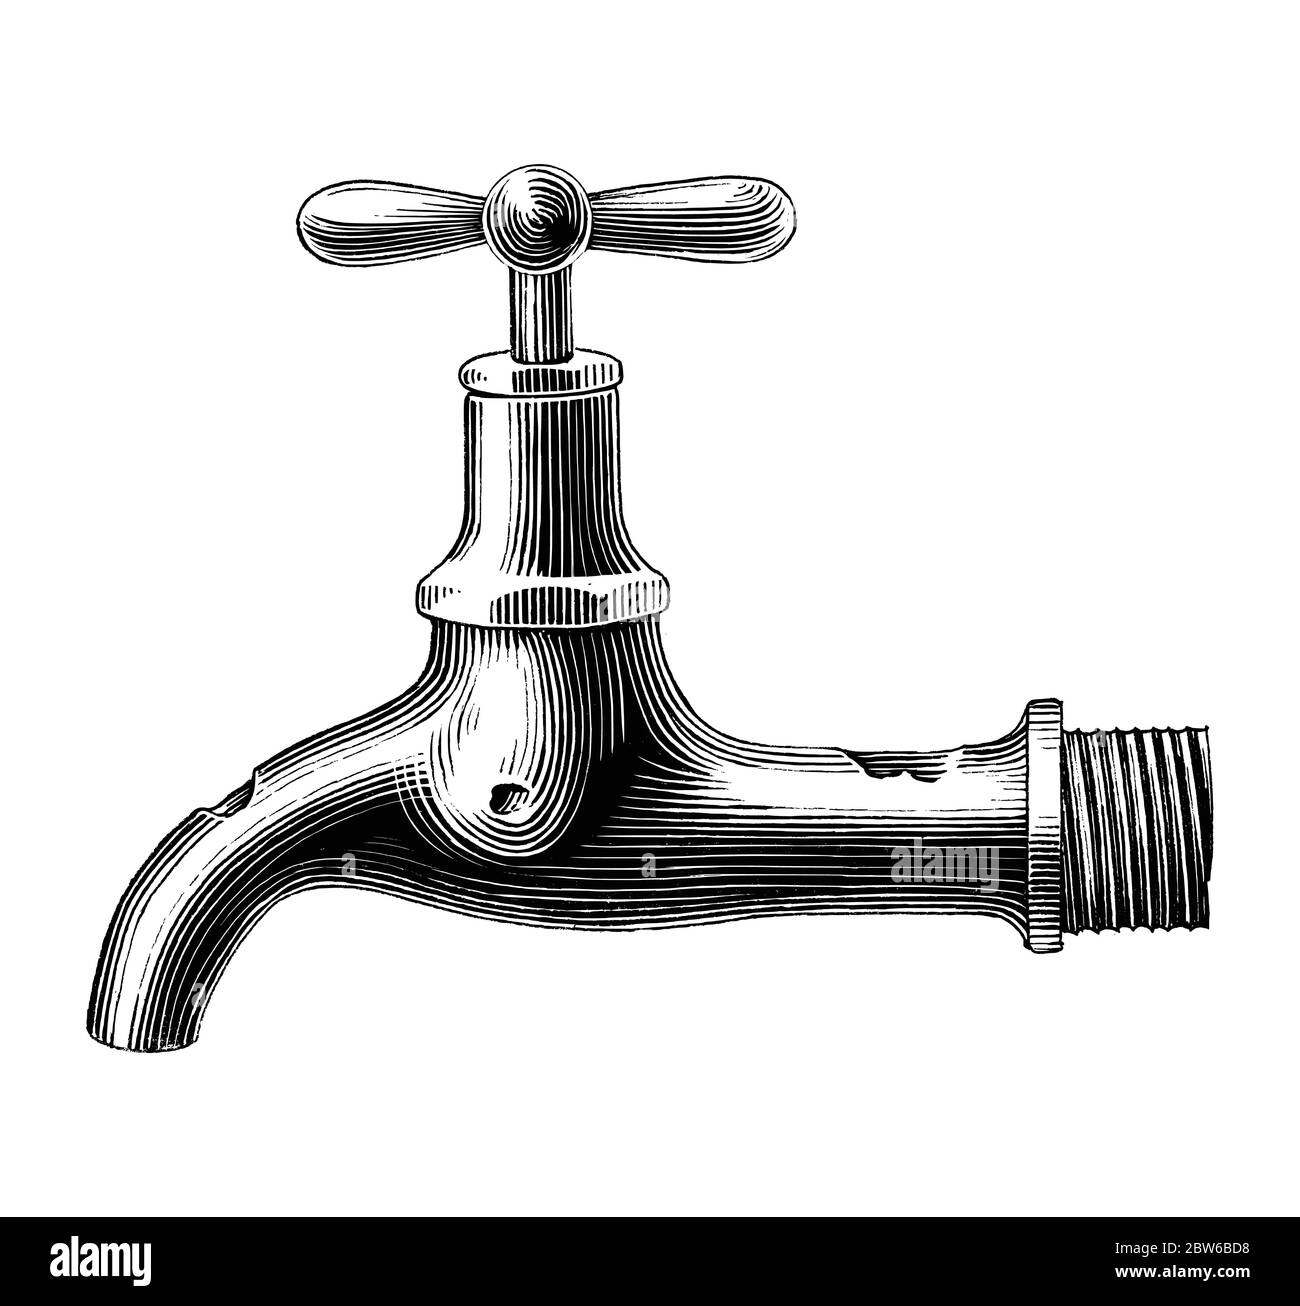 Vintage water tap hand drawing engraving illustration black and white clip art isolated on white background Stock Vector